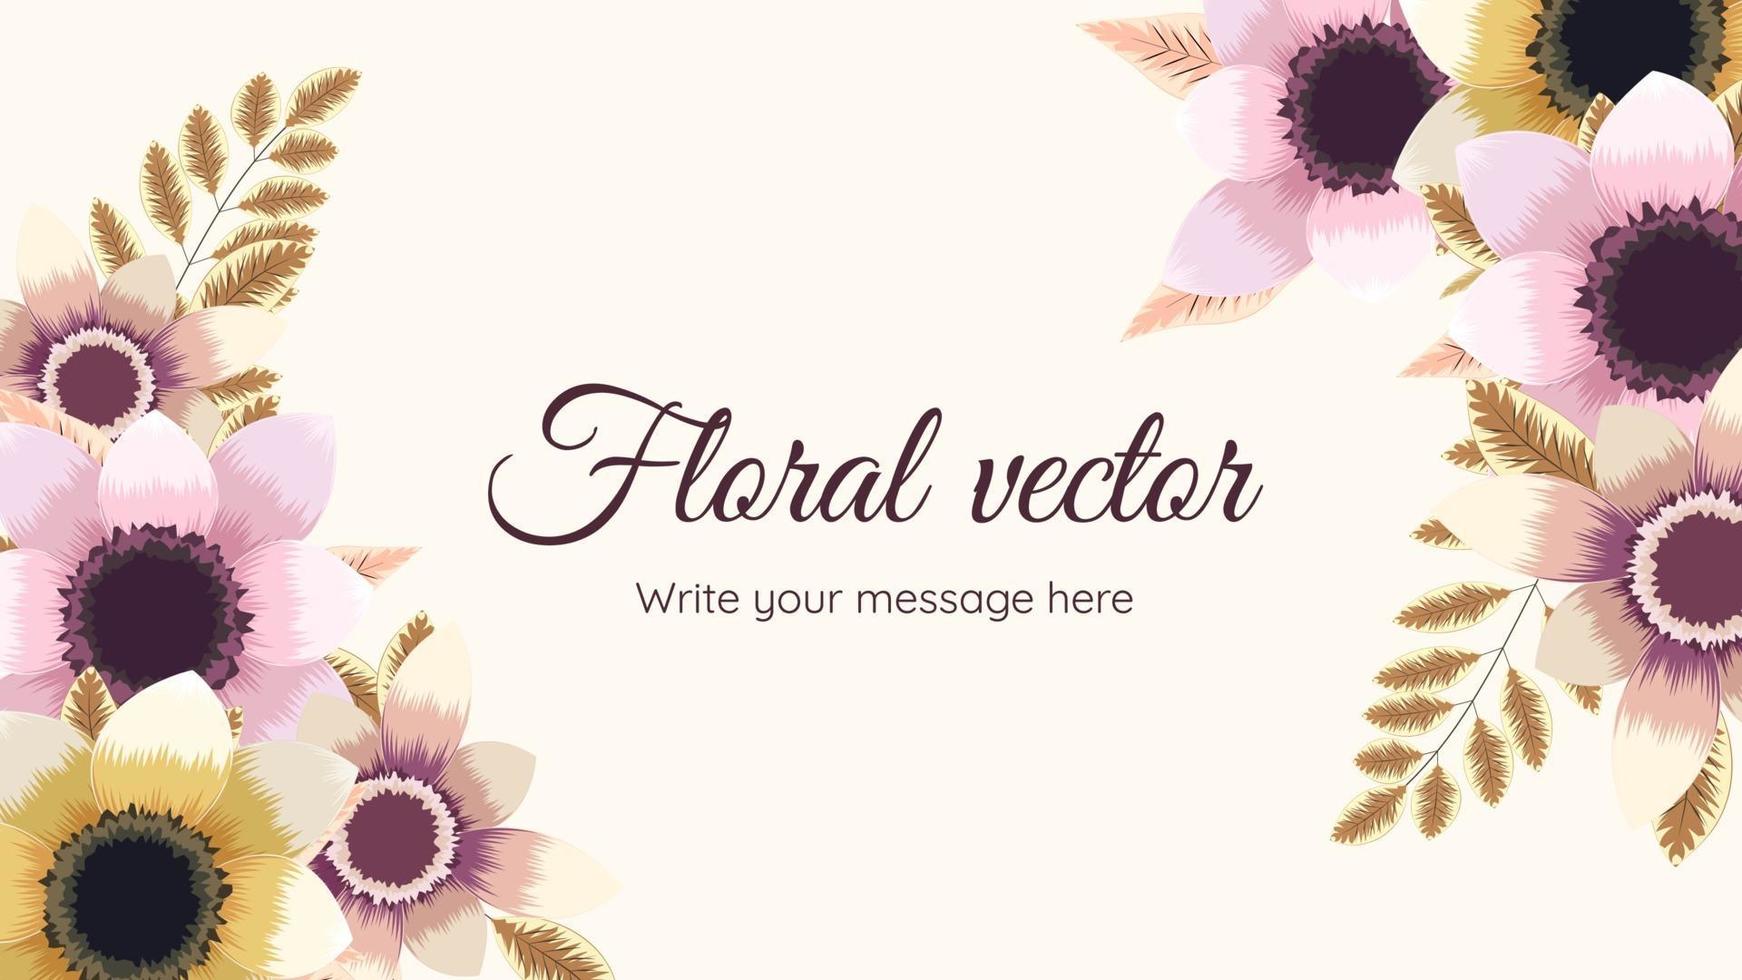 Floral vector border background with mulitcolor flowers text place